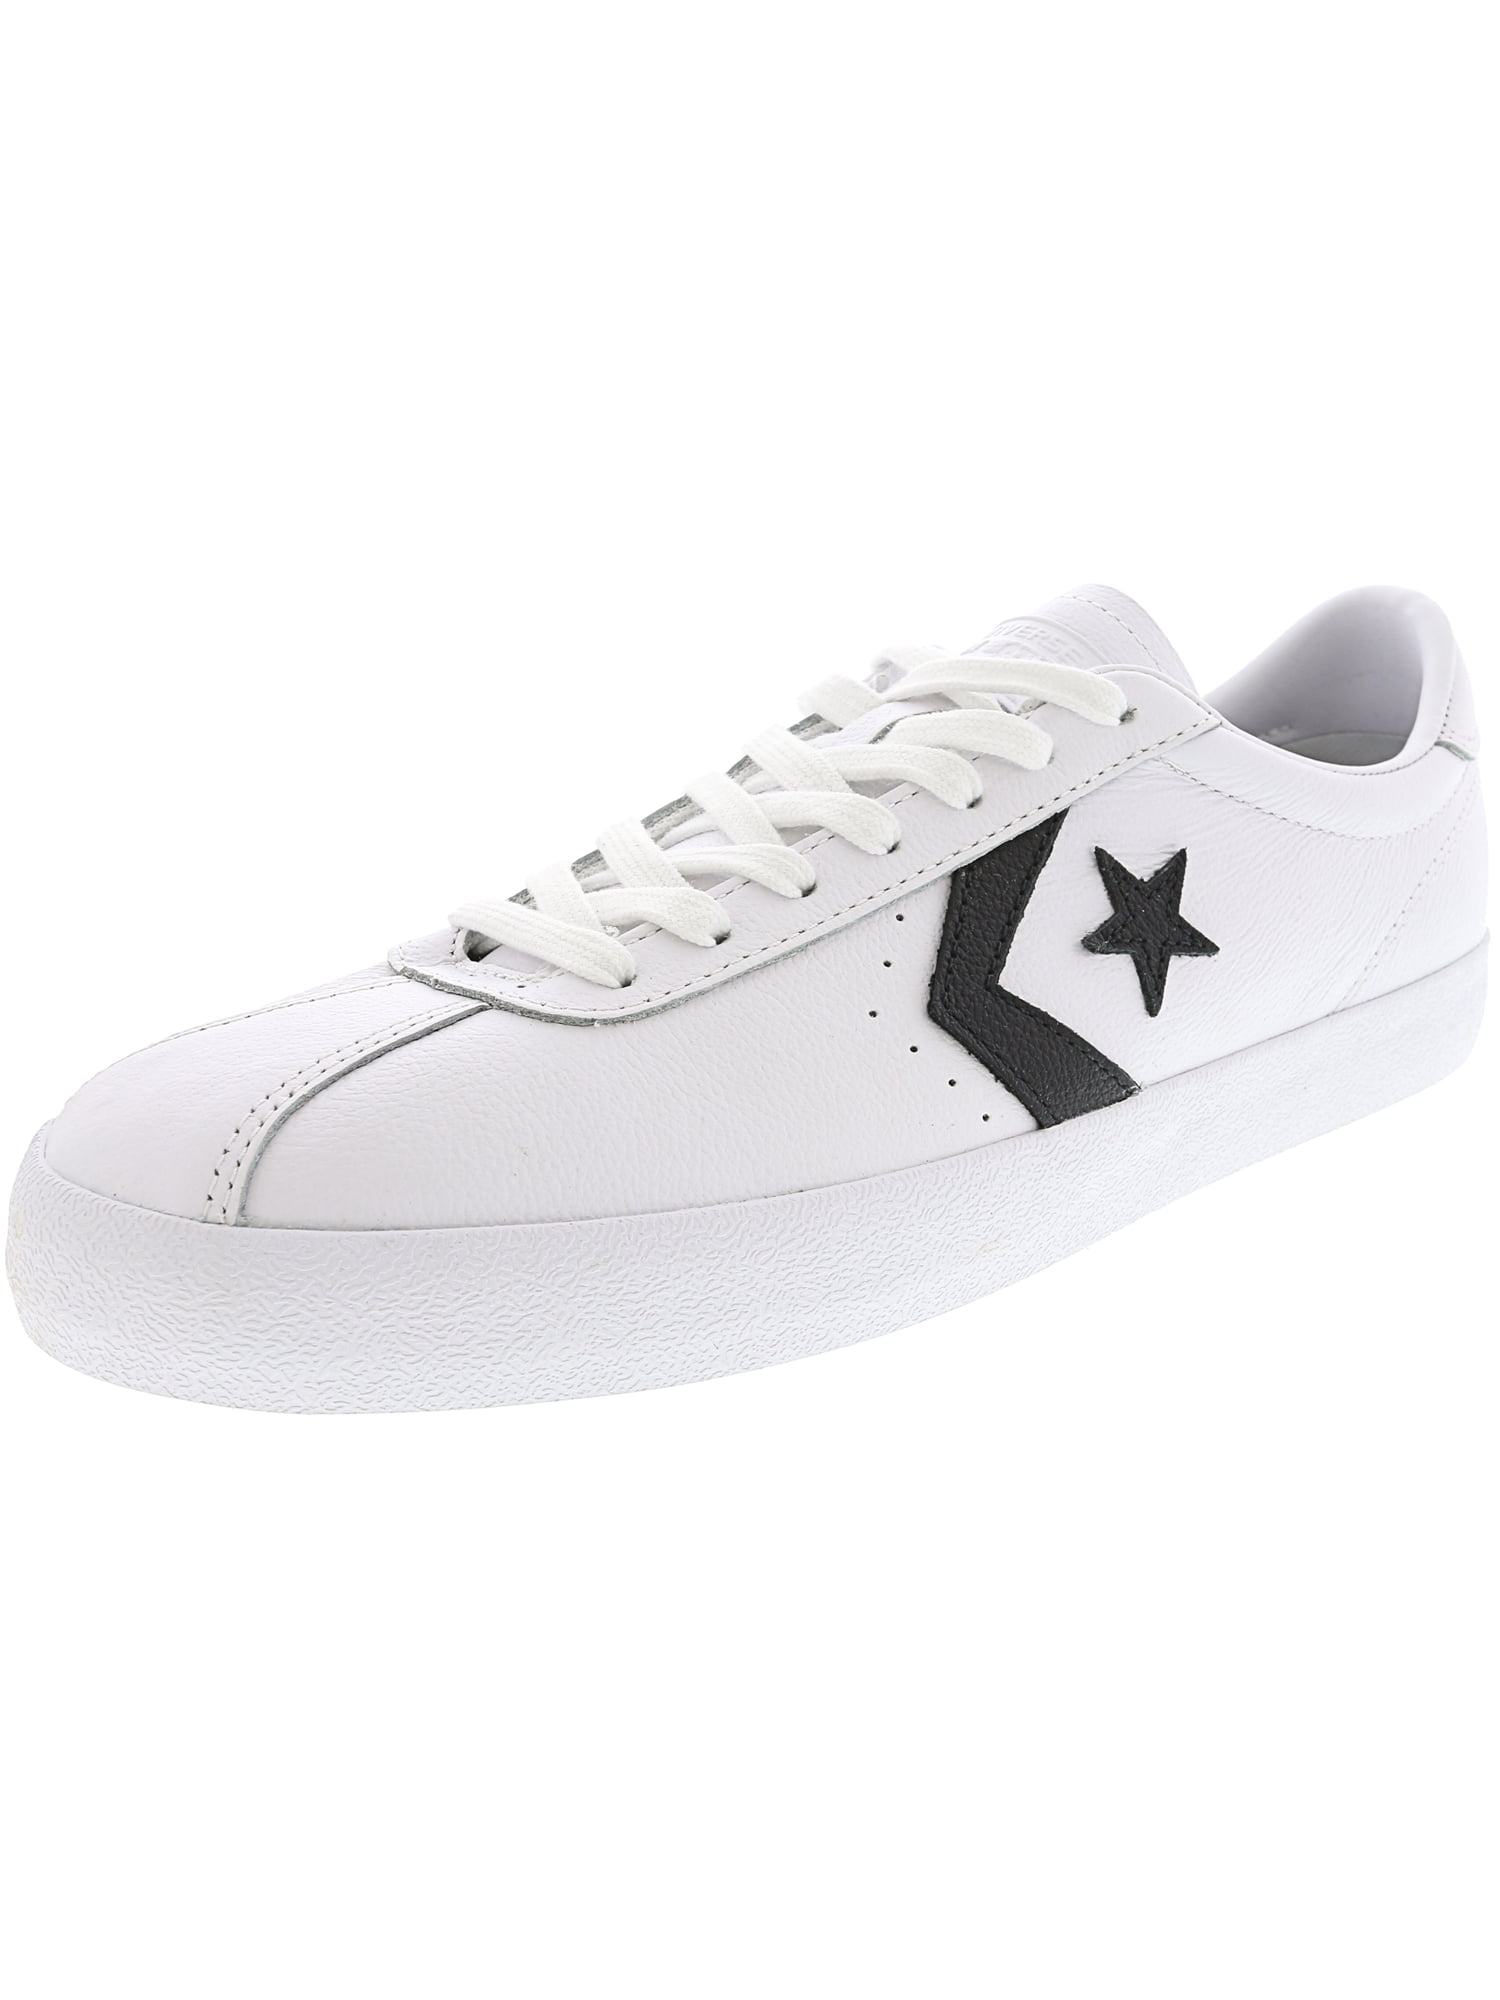 Converse Breakpoint Ox White / Ankle-High Fashion Sneaker 12.5M - Walmart.com